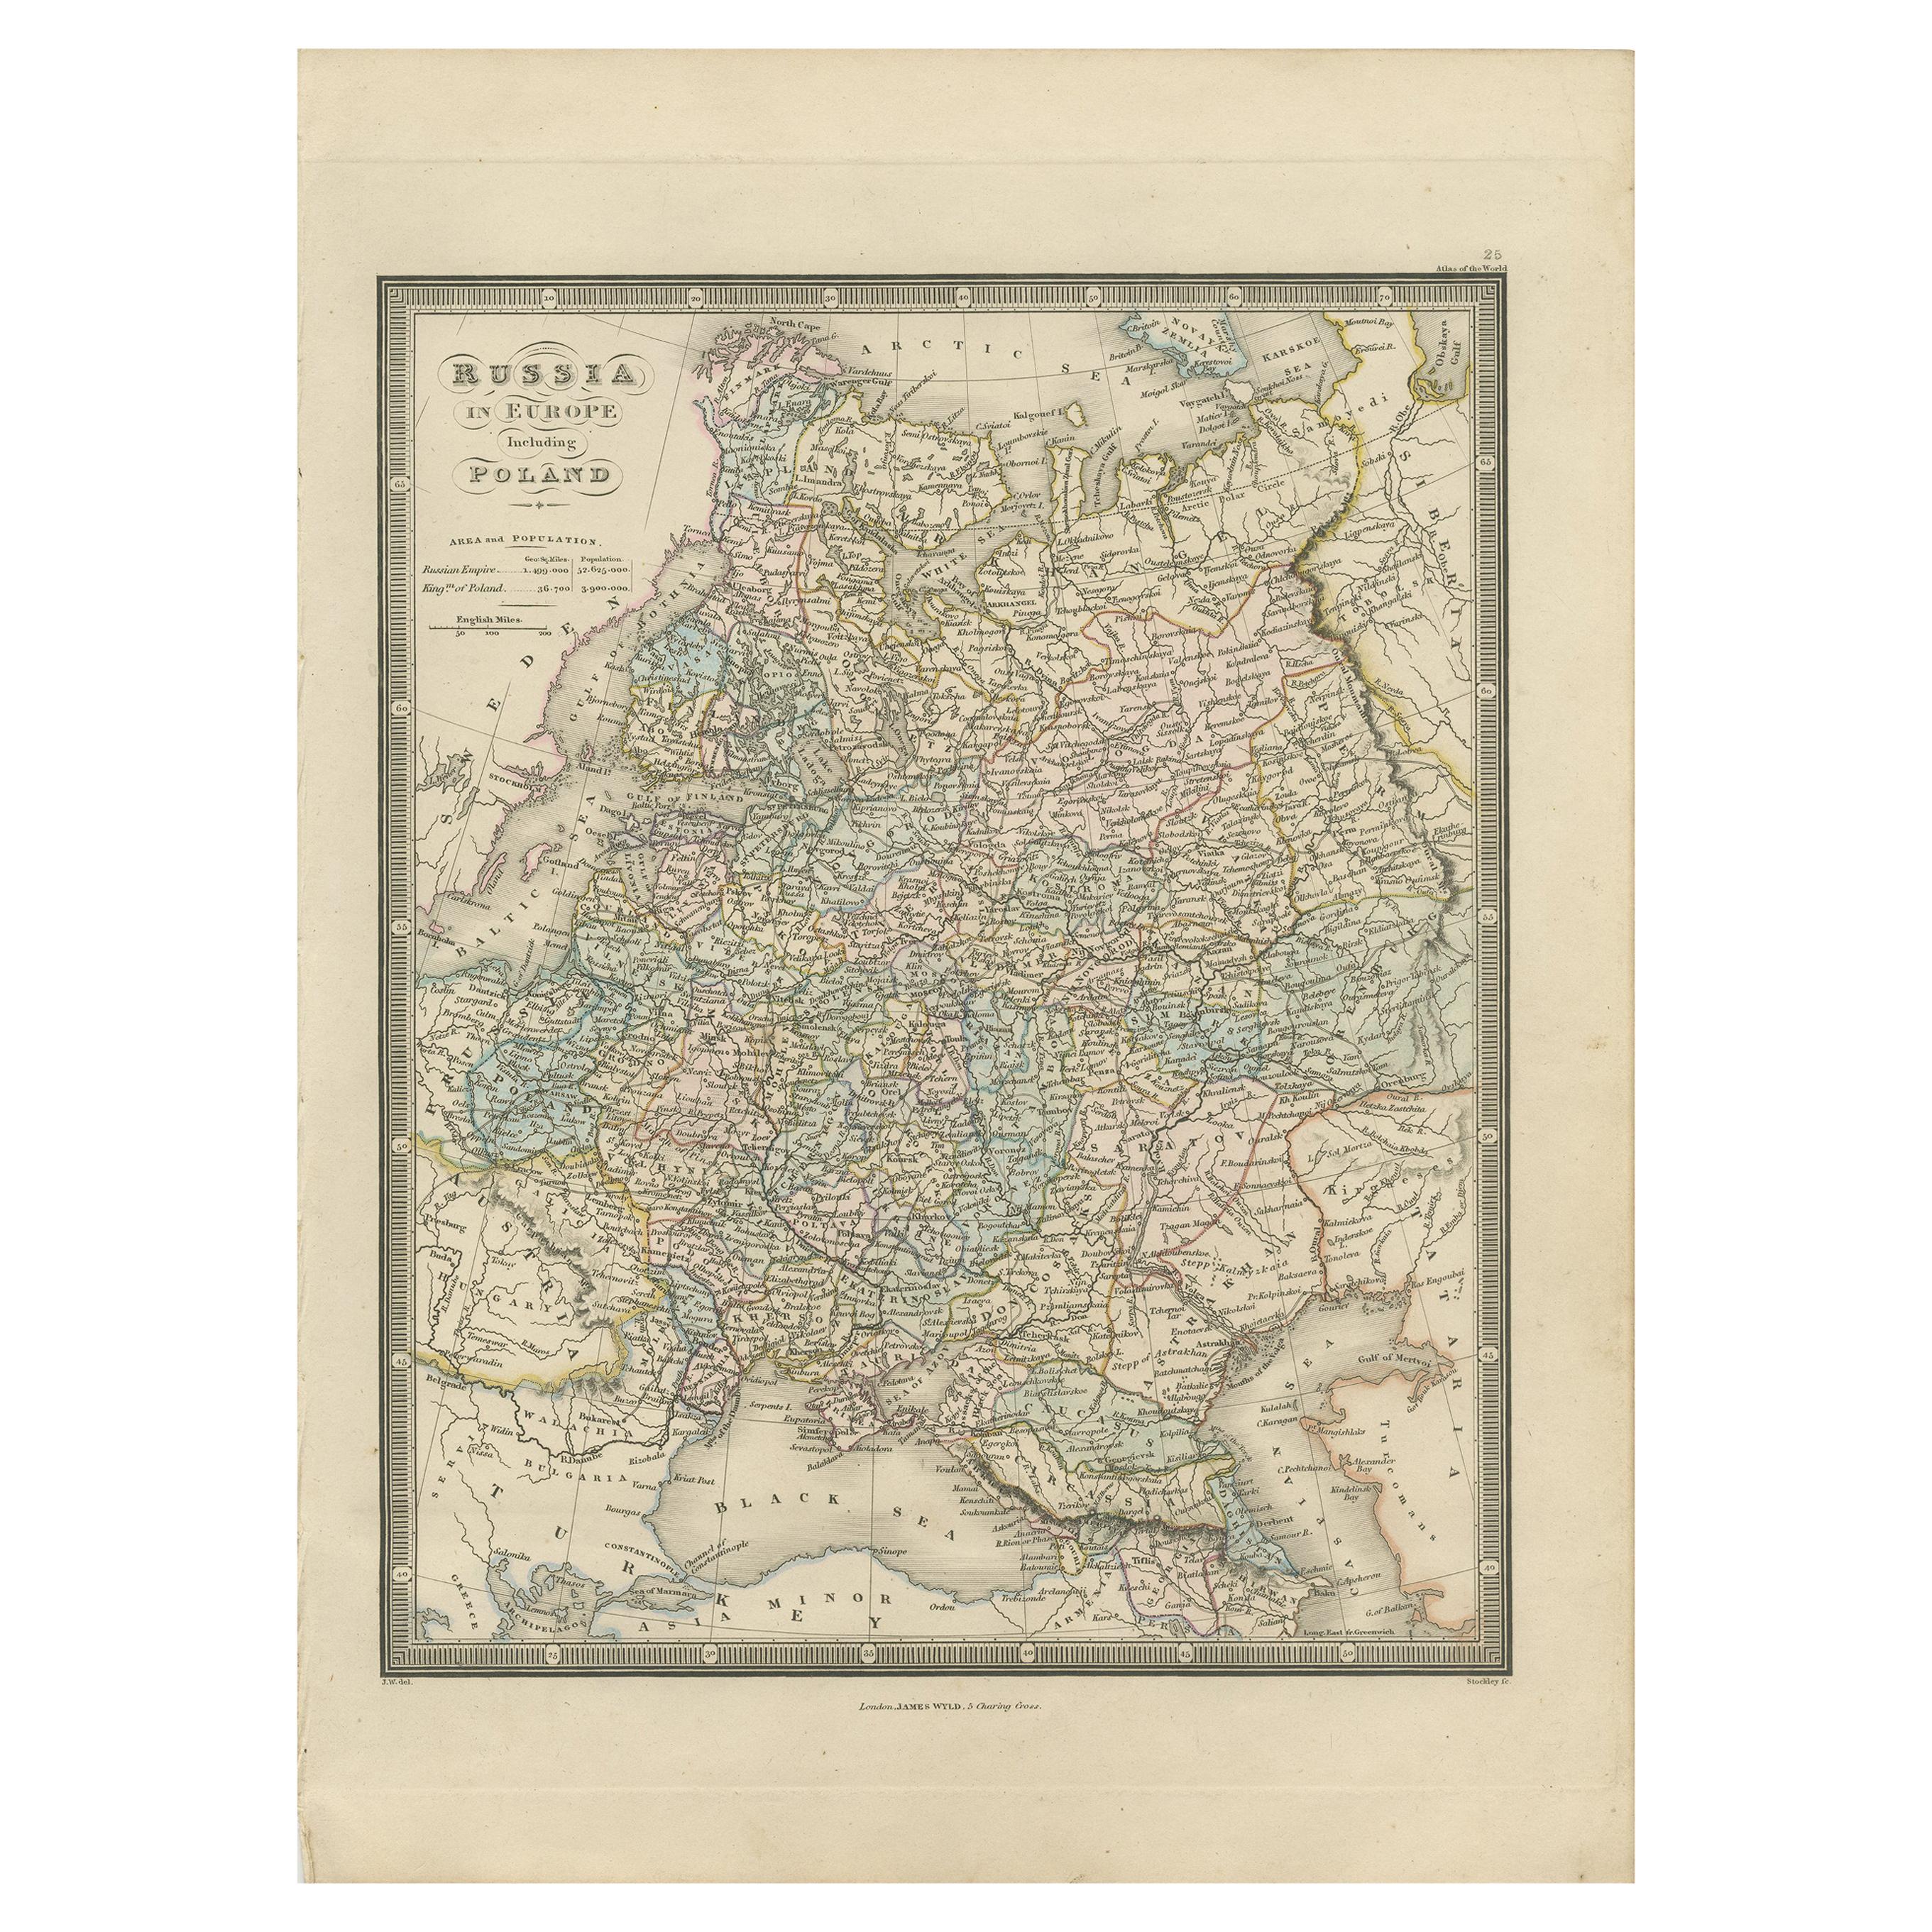 Antique Map of Russia in Europe and Poland by Wyld '1845' For Sale